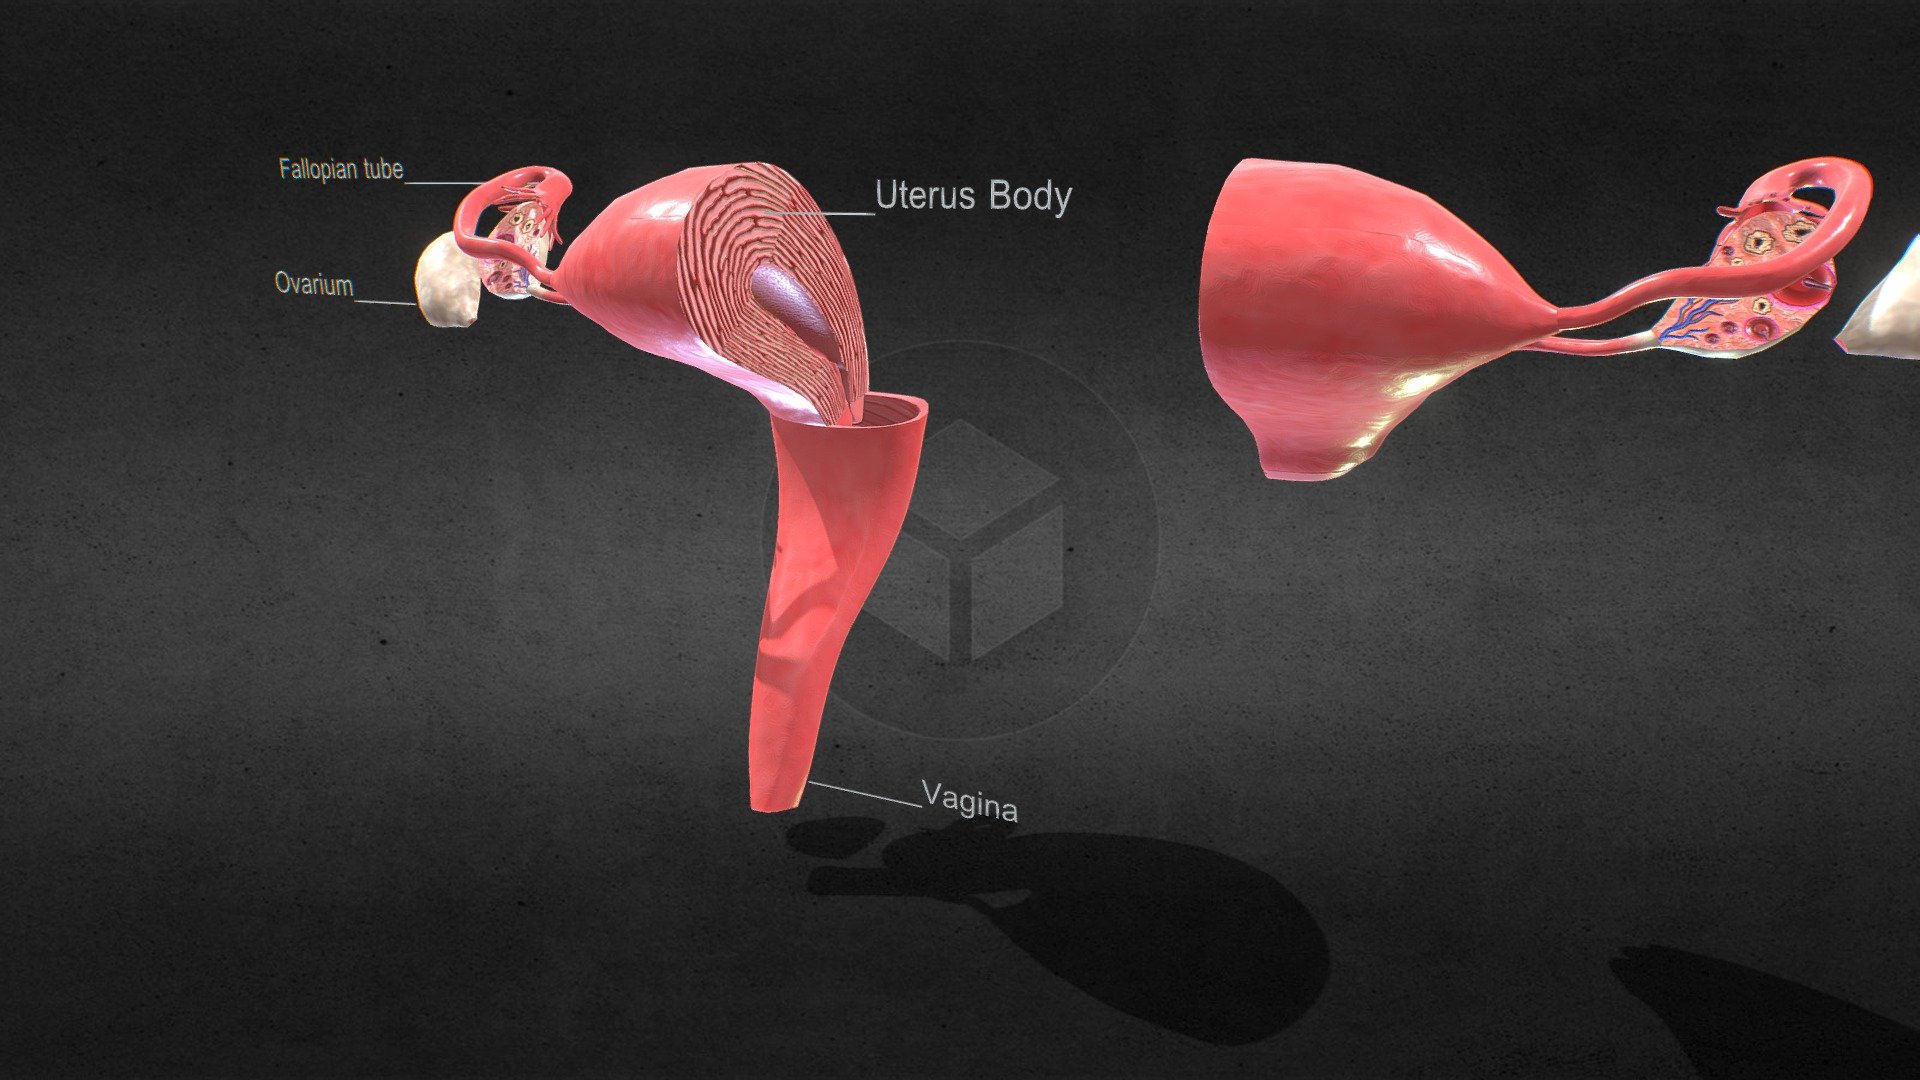 Uterus with anatomic cut






No errors or missing files

High-quality polygonal model

No N-GONS Faces

This model is created in polygon quad &amp; tri with good edge flow, So you can edit and change it according to your requirements.

correctly scaled accurate representation of the original object.

If Neccesory HDR Light Map is included.

PBR textures are included.

Objects are grouped and named

The scene is well arranged (proper layer and group)

Objects, materials, and textures are named.

Poly Details:

Units: Centimeters
Polys counts: 12354
Vertices counts: 12442

Formats:

3Ds Max 2014 _V-Ray
3Ds Max 2014 _Scanline
Maya 2016_V-Ray
Cinema 4D R20 _Standard
FBX_Embed
OBJ
3Ds

Every model has been checked with the appropriate software

Textures:

Uterus x 8.png **** 4096x4096

[Diffuse, Base color, Normal, Specular, Glossiness, Roughness, AO, Metallic ] - Uterus With Anatomic Cut - Buy Royalty Free 3D model by 3D4SCI 3d model